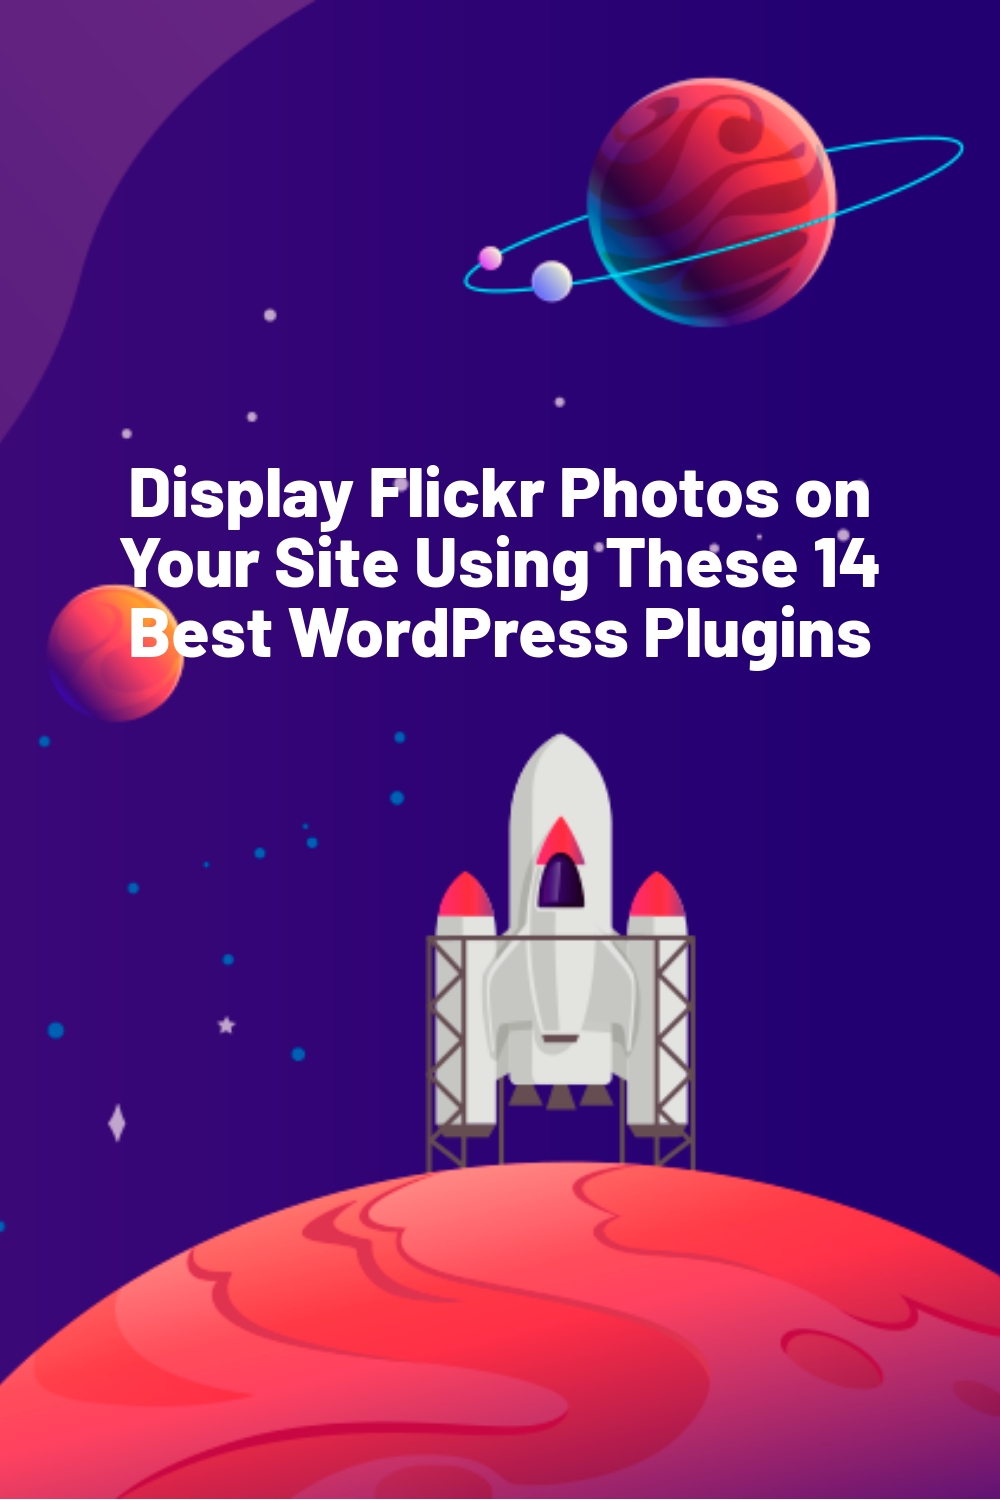 Display Flickr Photos on Your Site Using These 14 Best WordPress Plugins